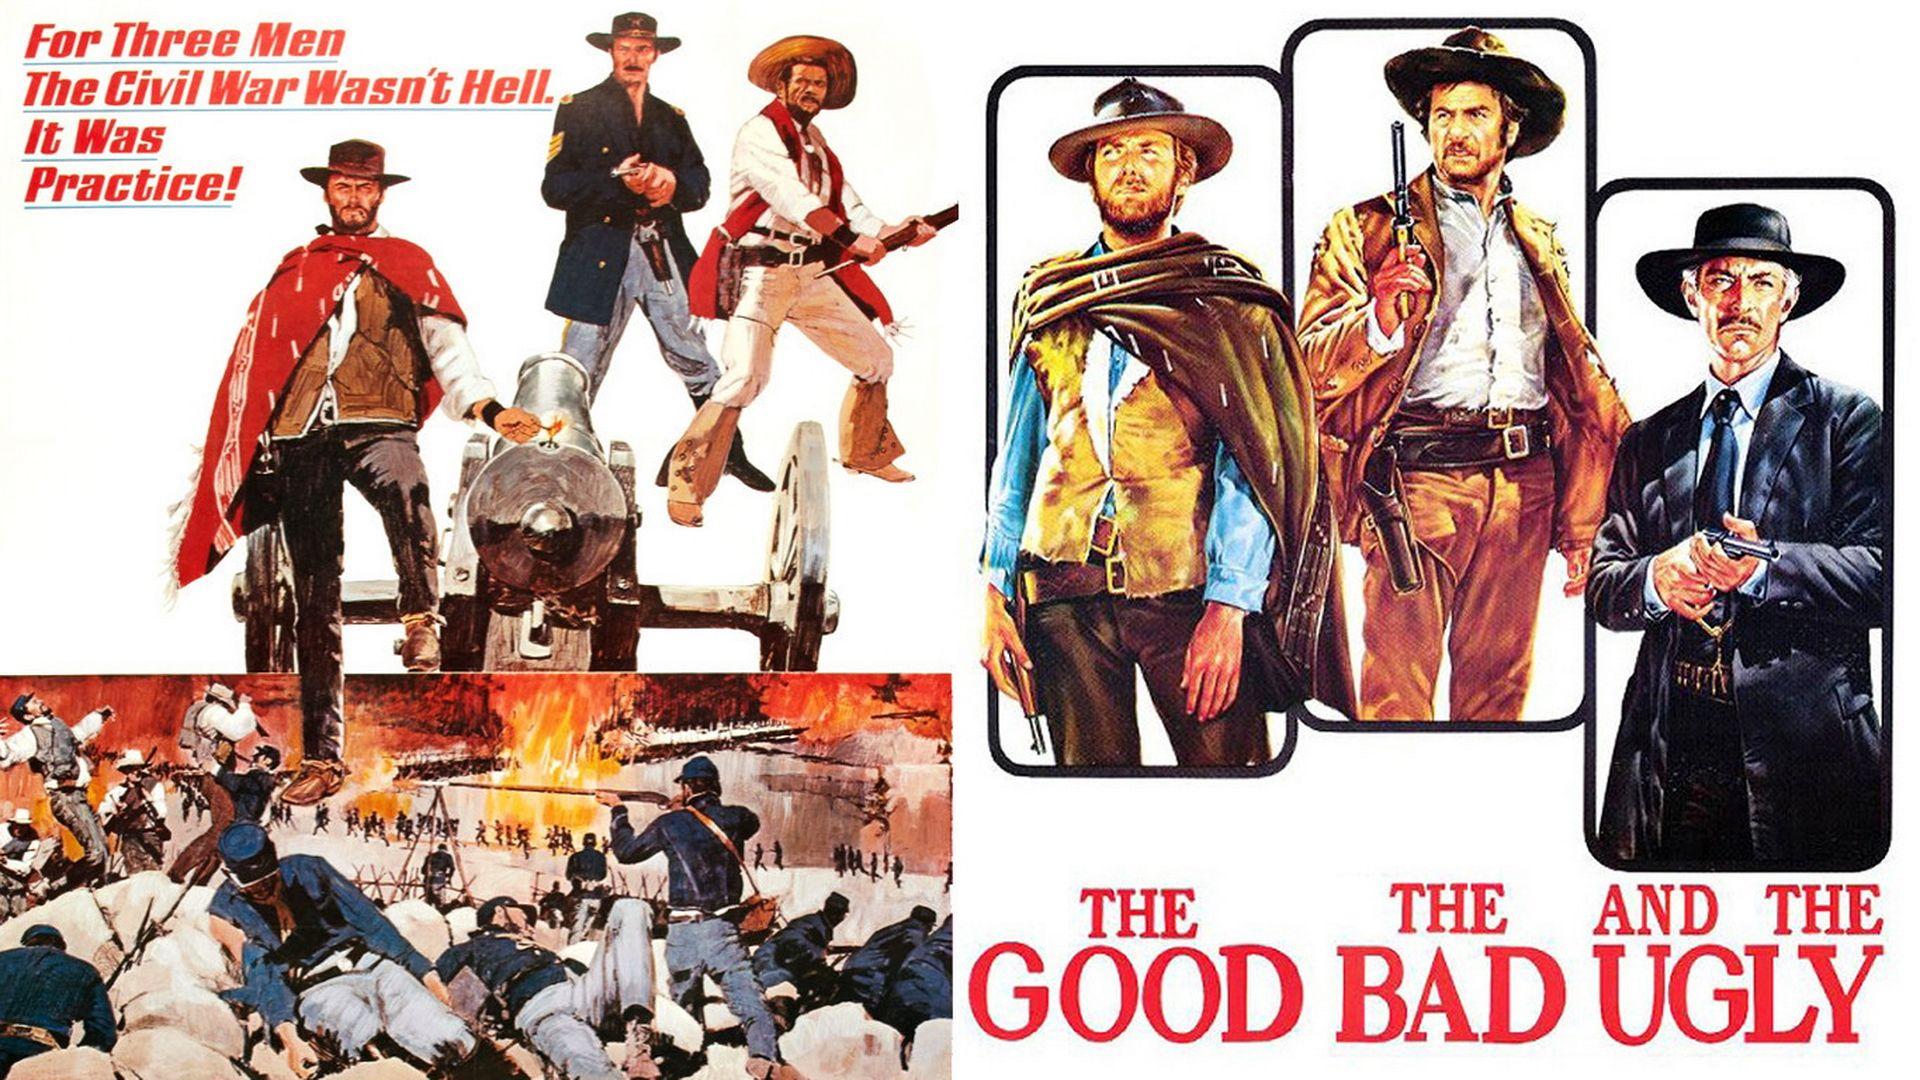 The Good, the Bad, & the Ugly (1967)